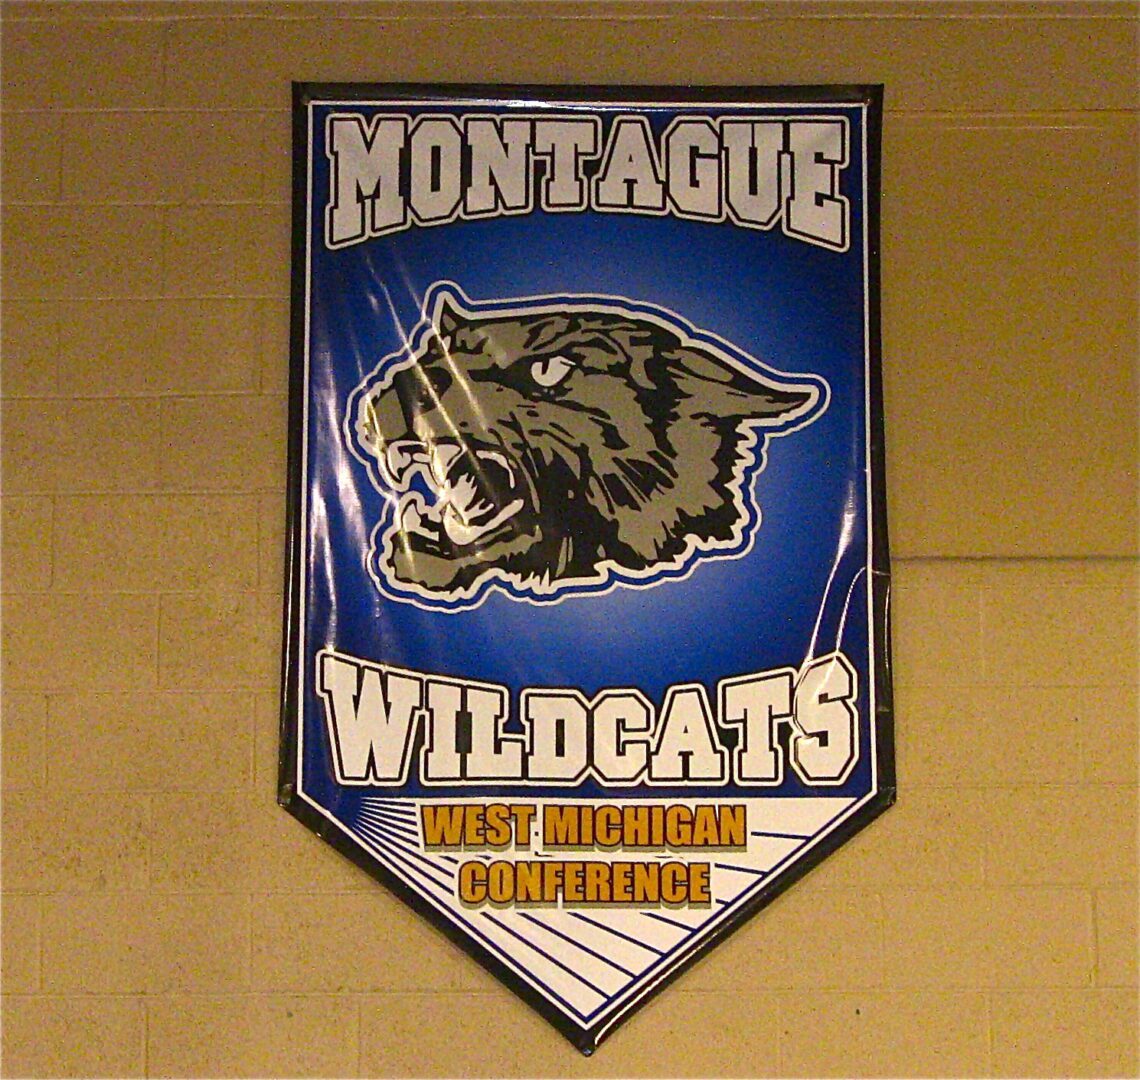 Montague takes second place in a 20-team cross country event over the weekend